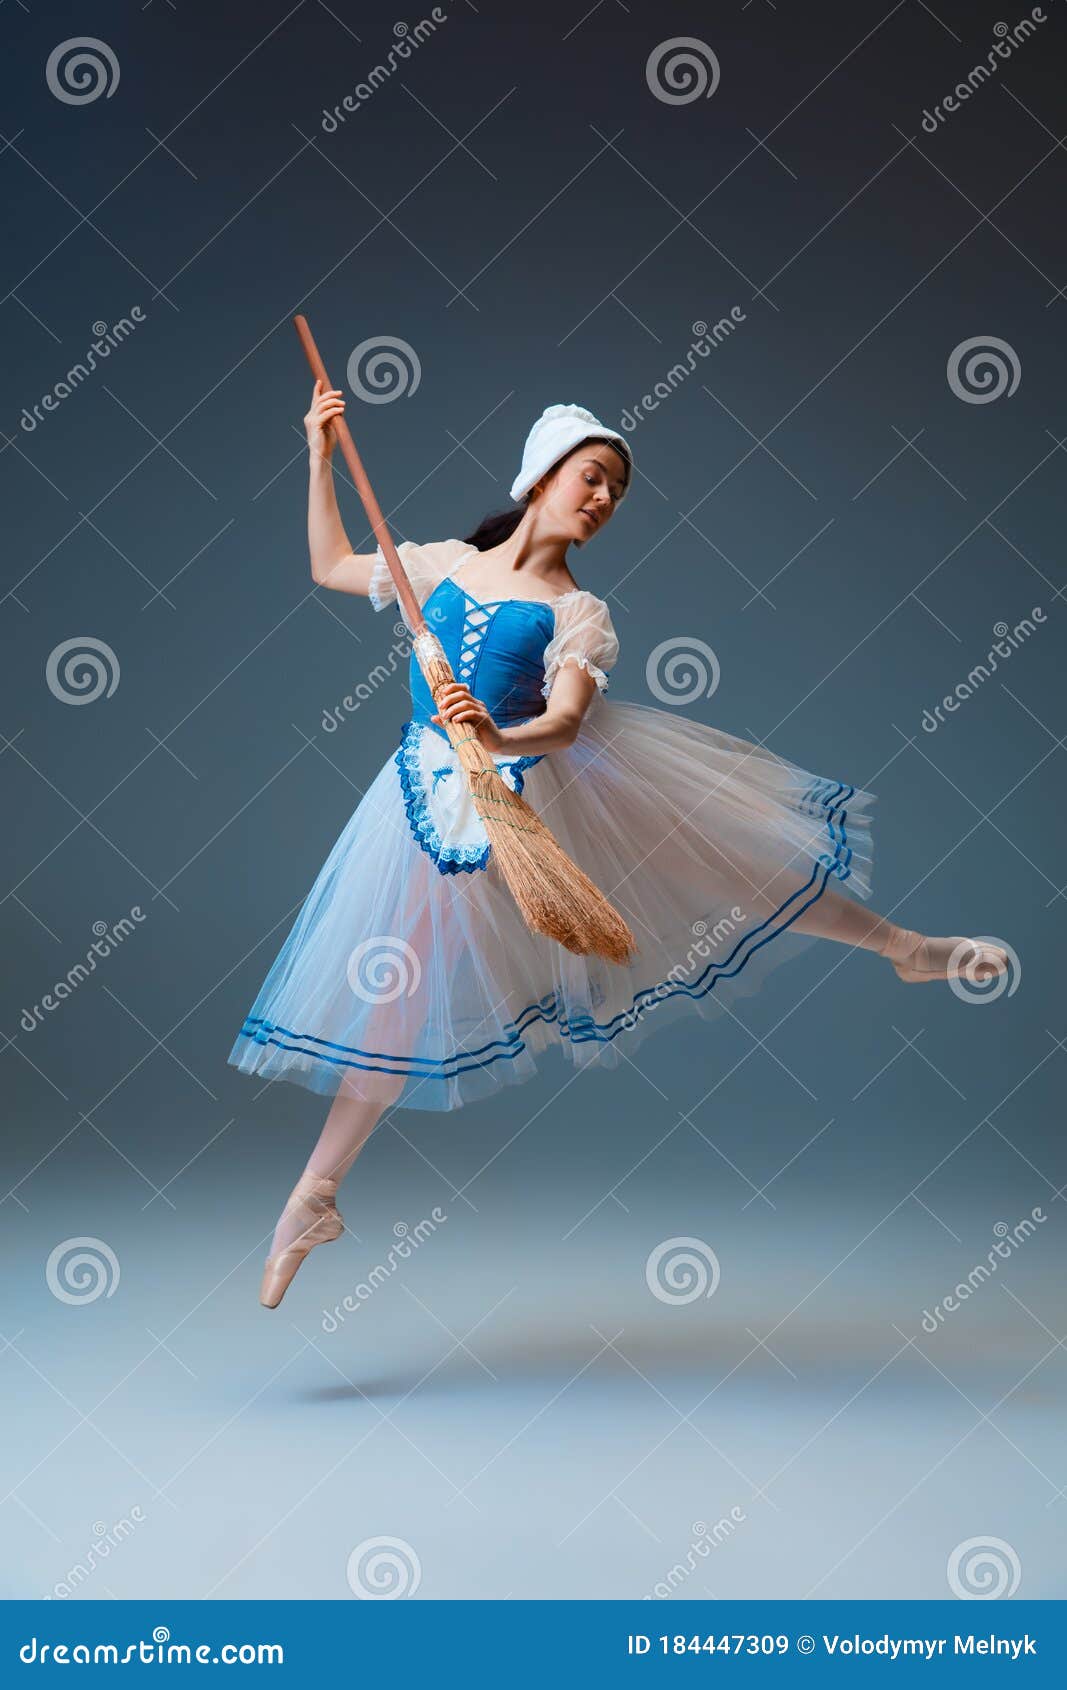 young and graceful female ballet dancer as cinderella fairytail character